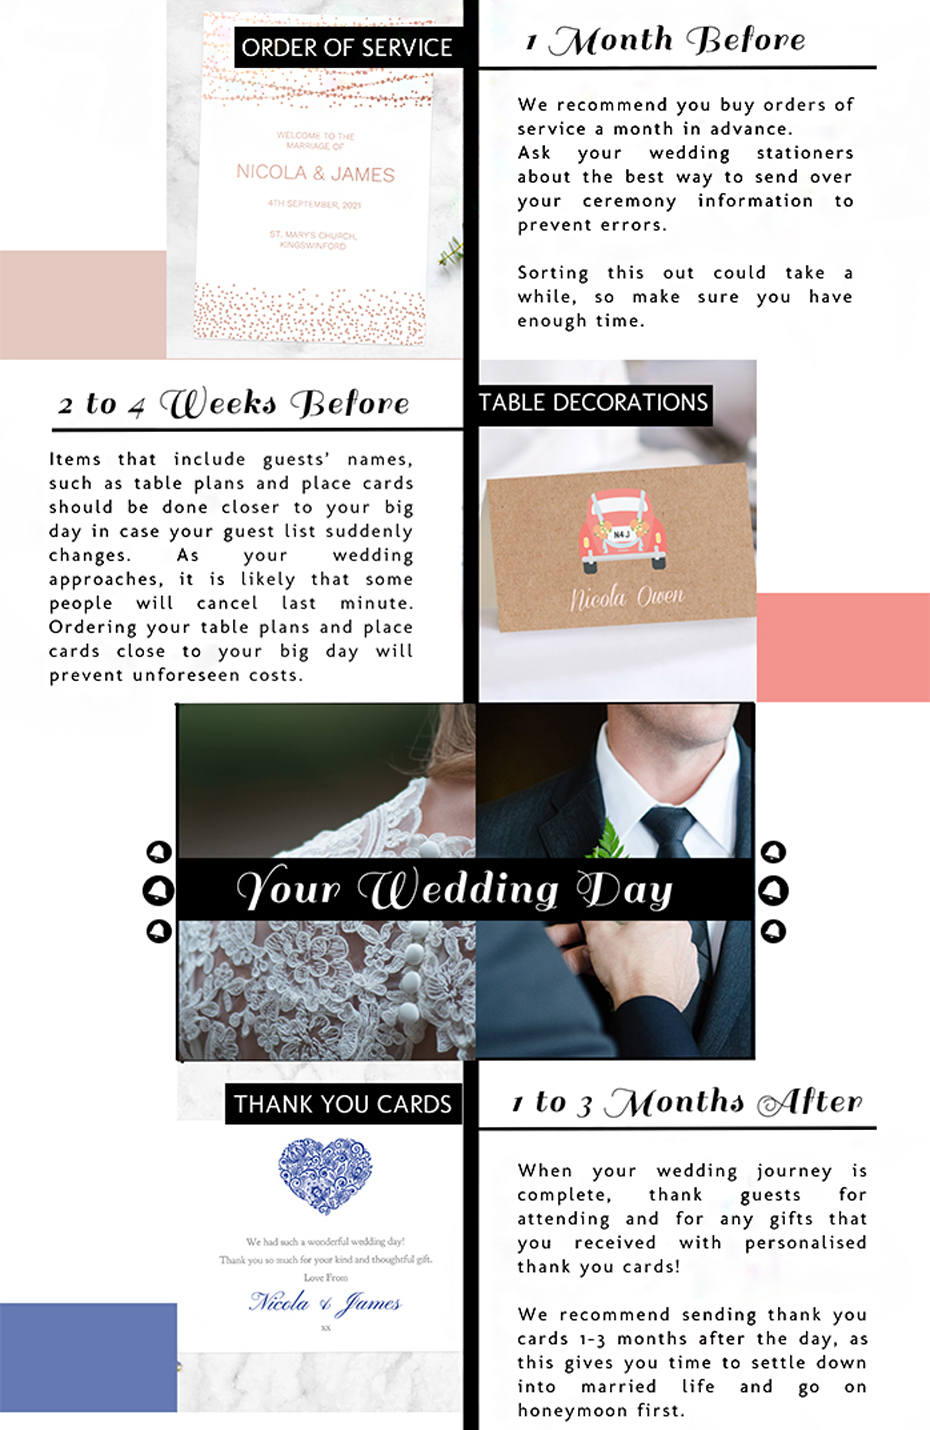 wedding stationery timeline, 1 month before to 3 months after